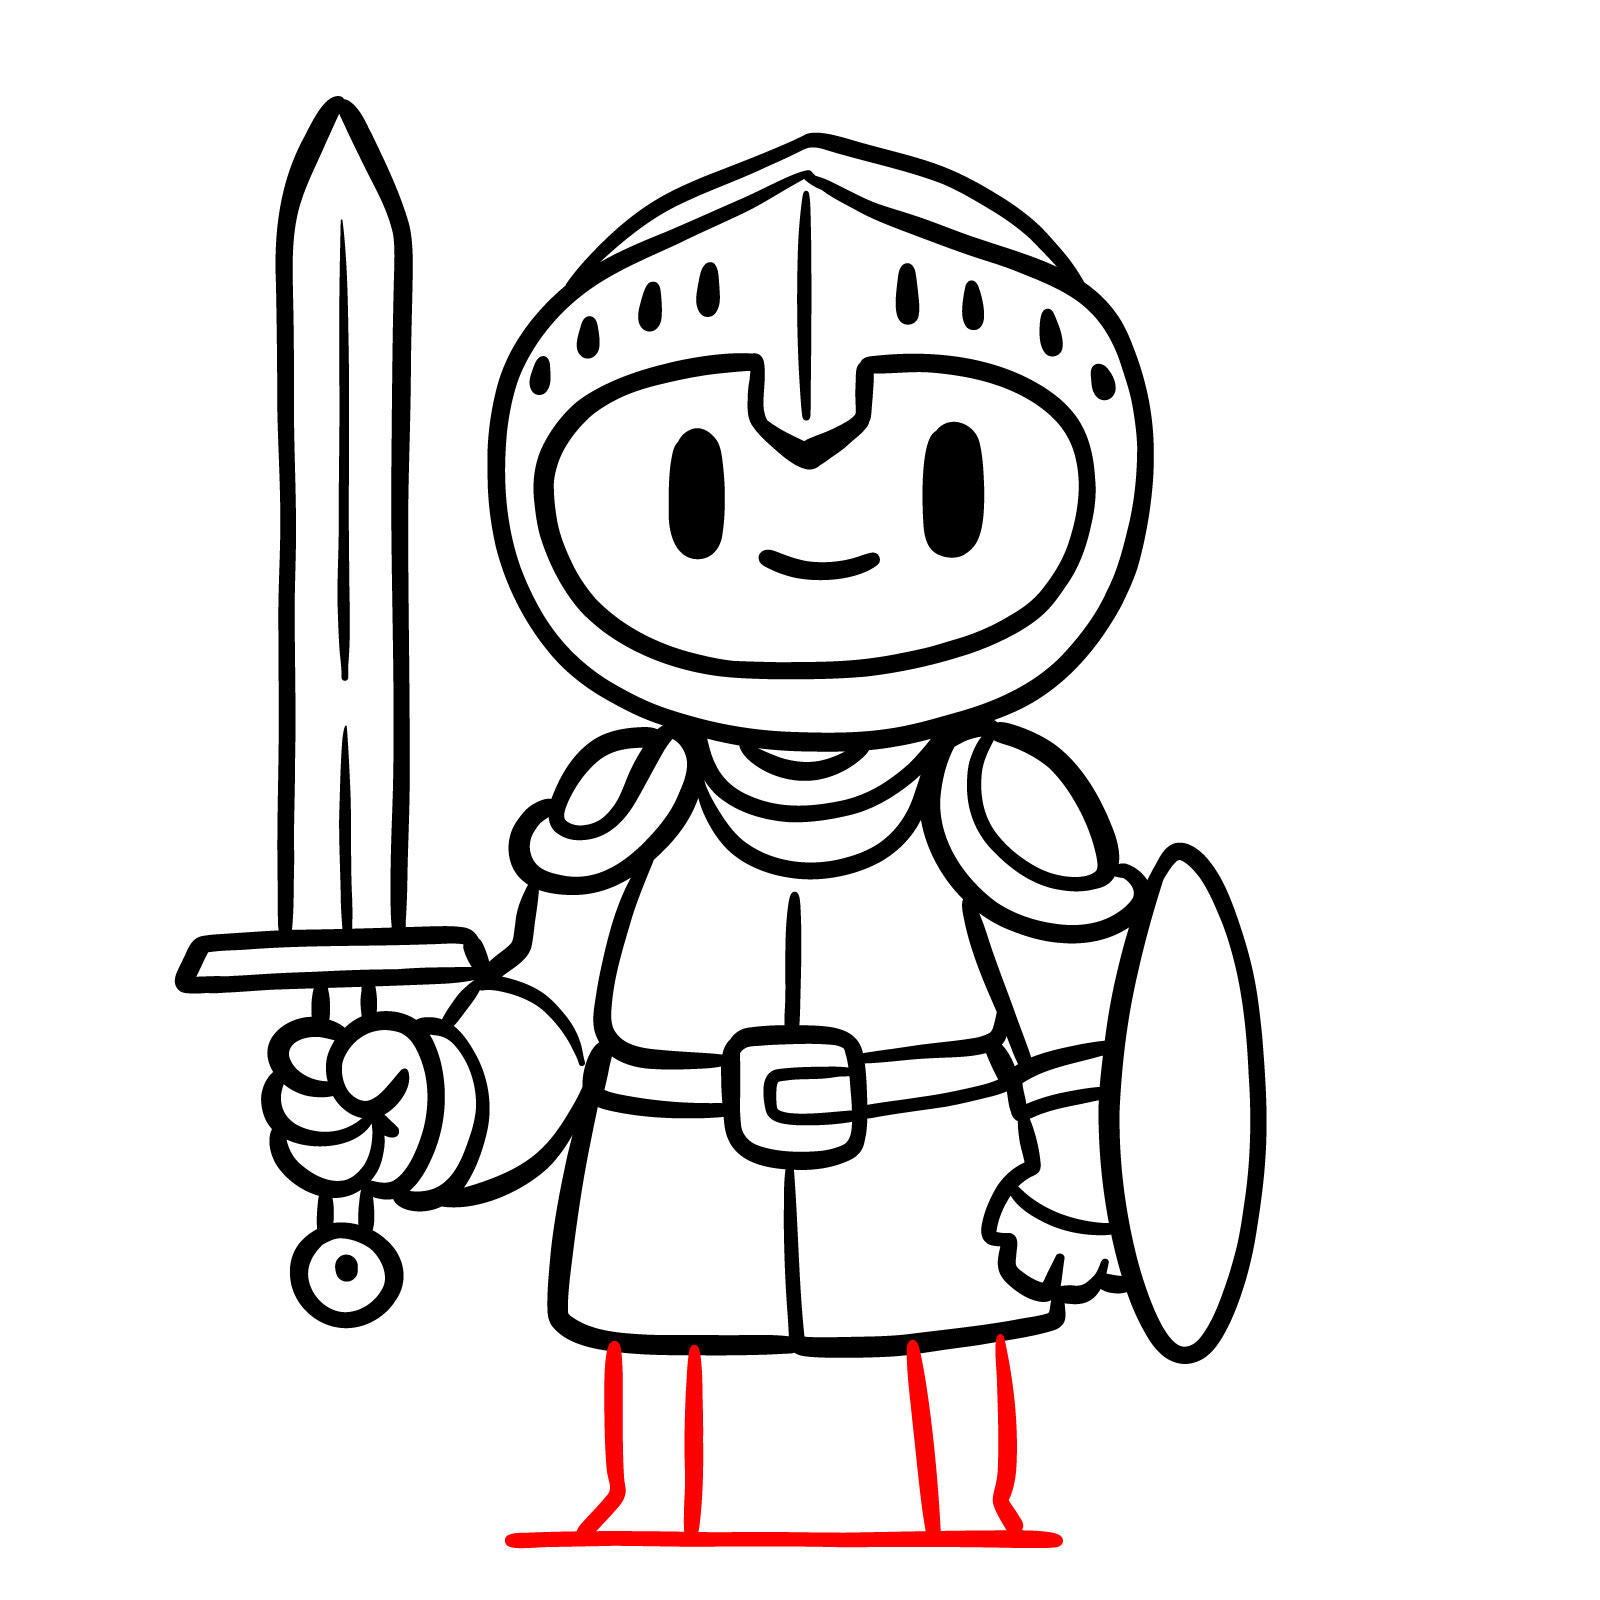 How to draw a cartoon paladin step 13: legs and ground line